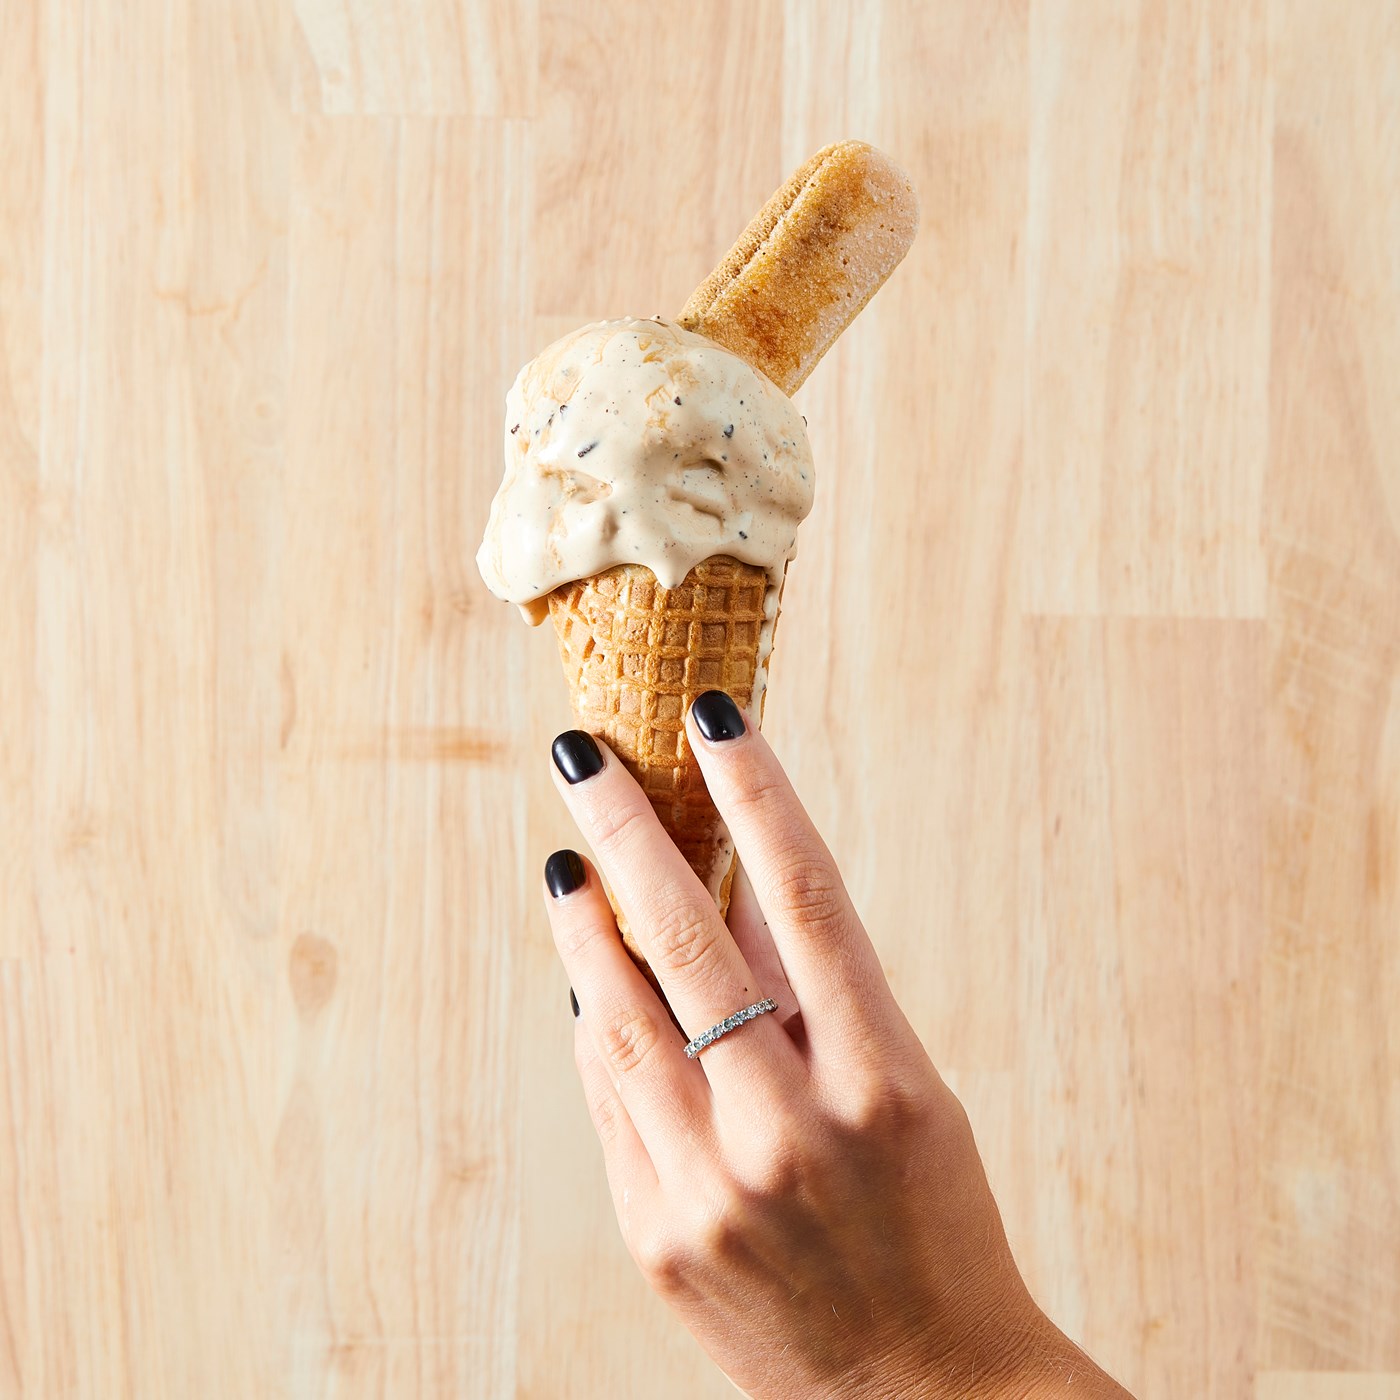 A hand with black-painted nails holds up a scoop of gelato.